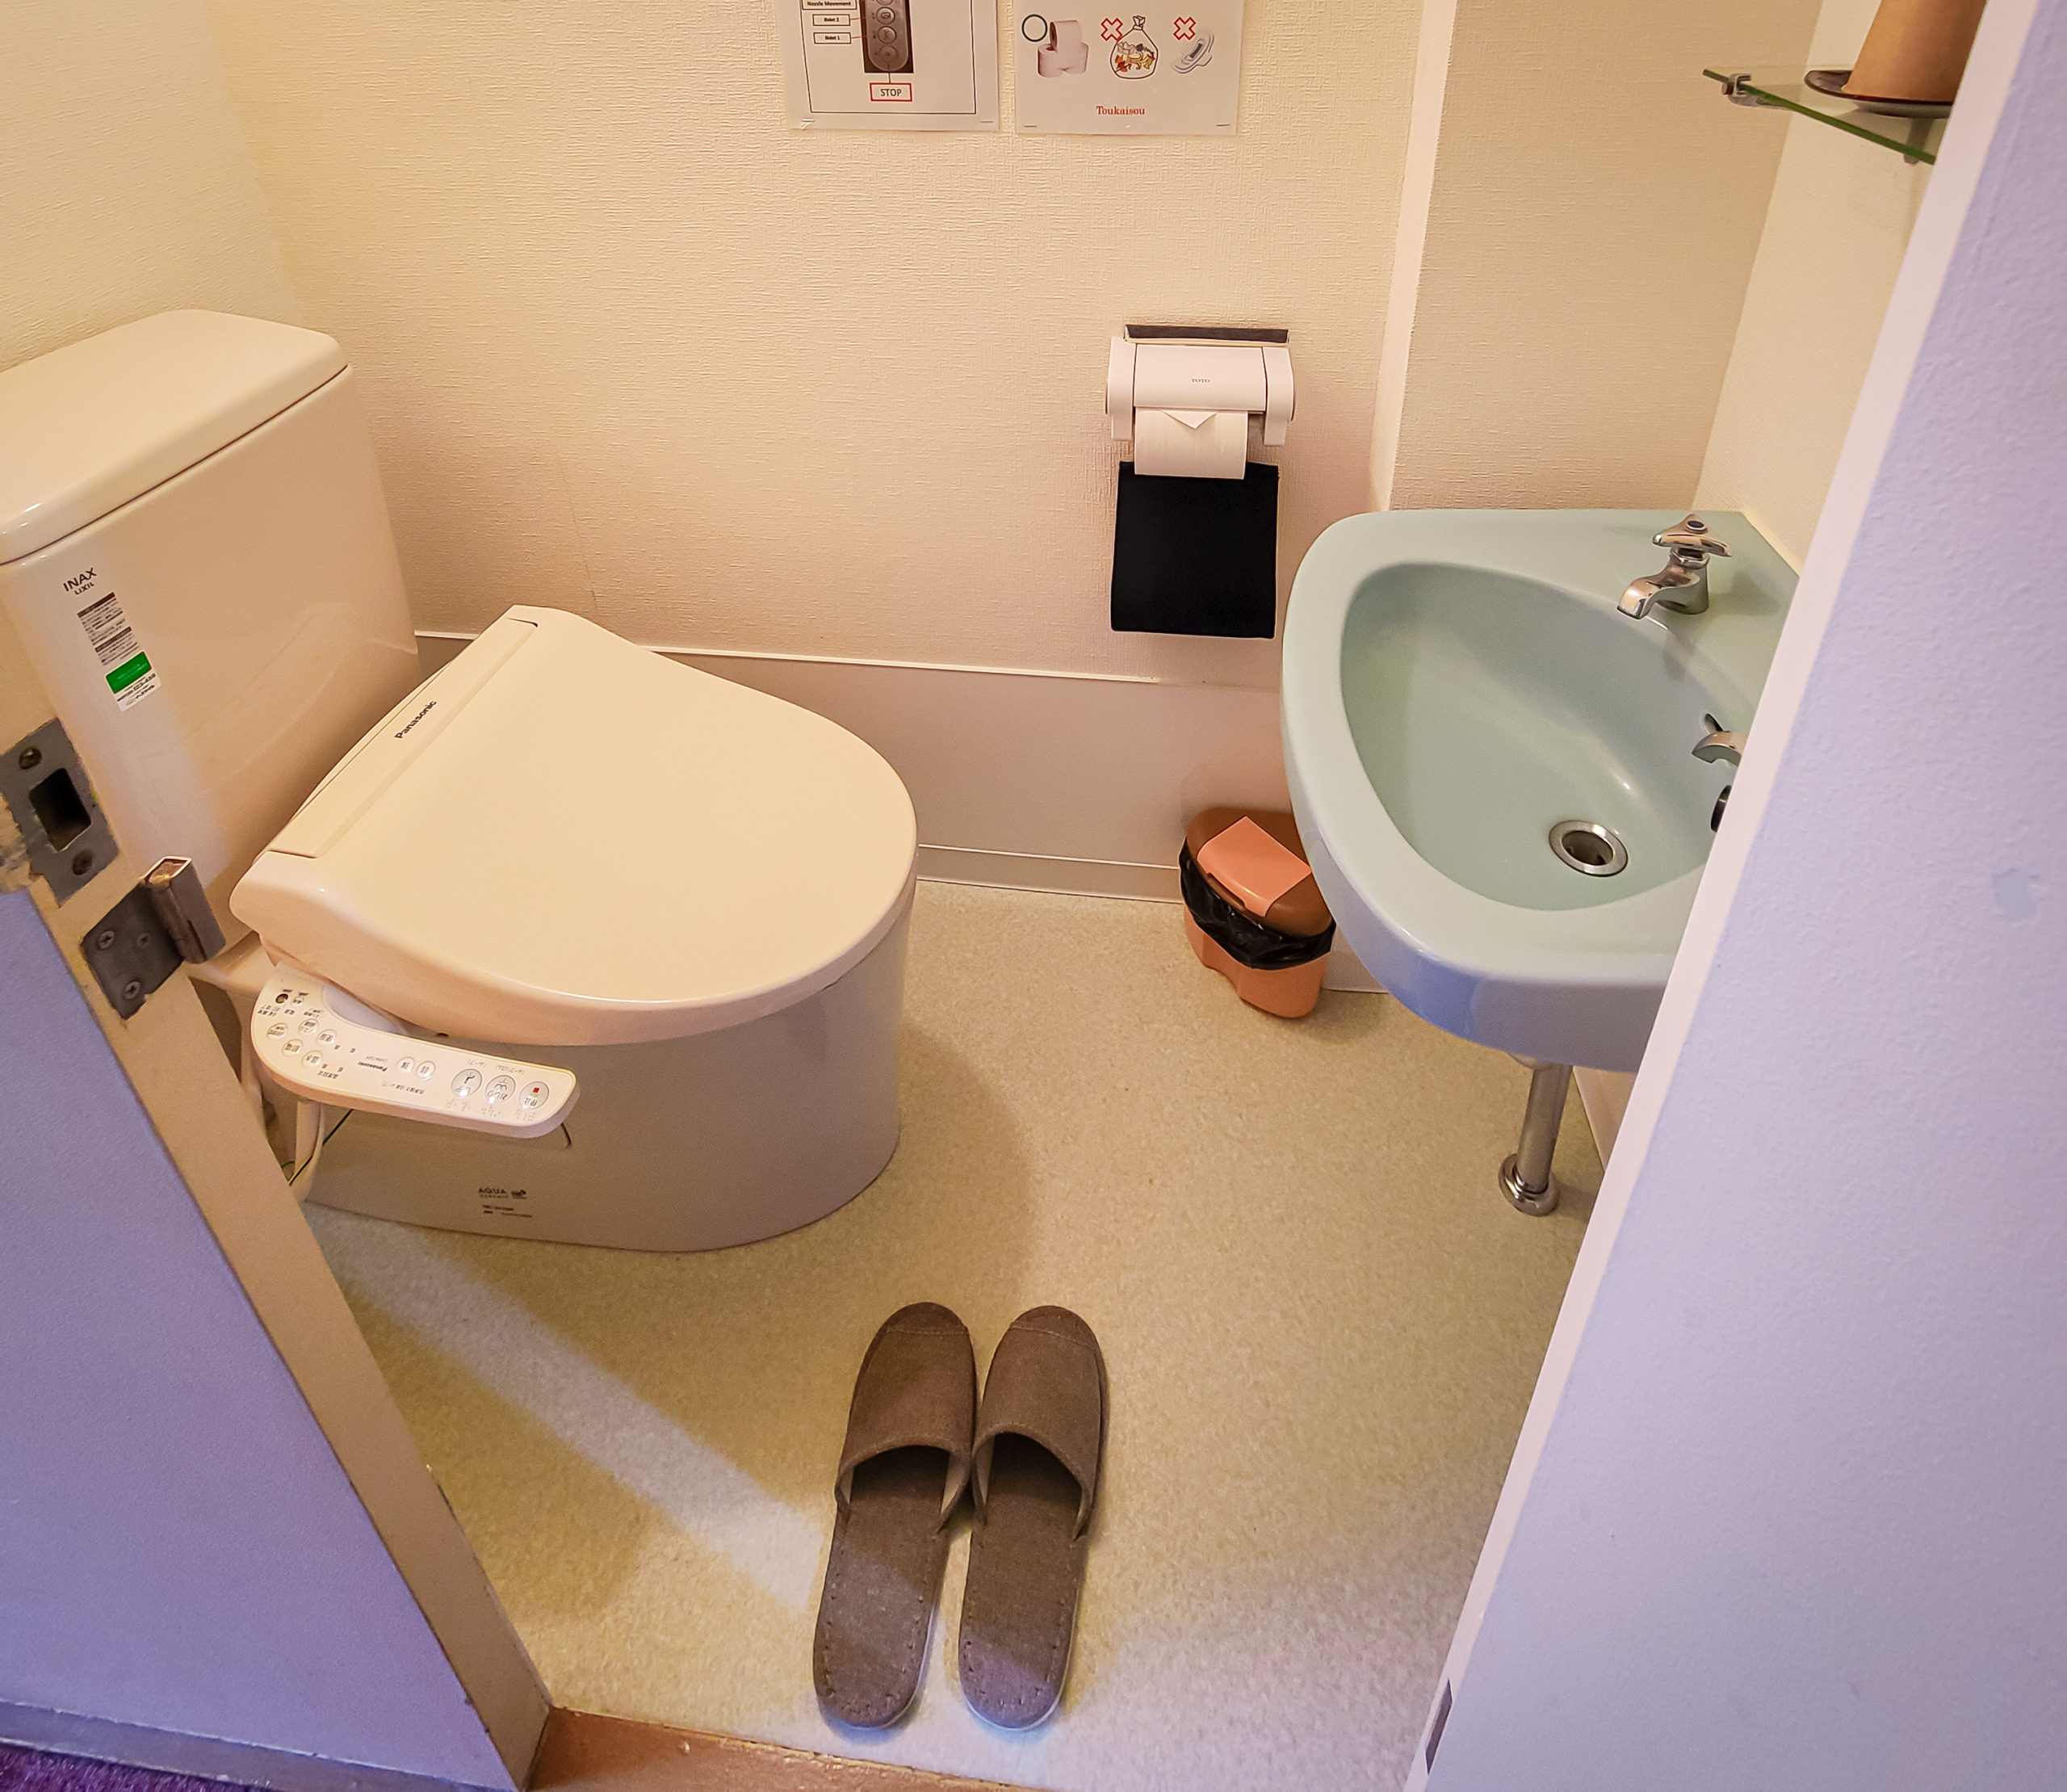 In most of the rooms, the bath is separate from the toilet